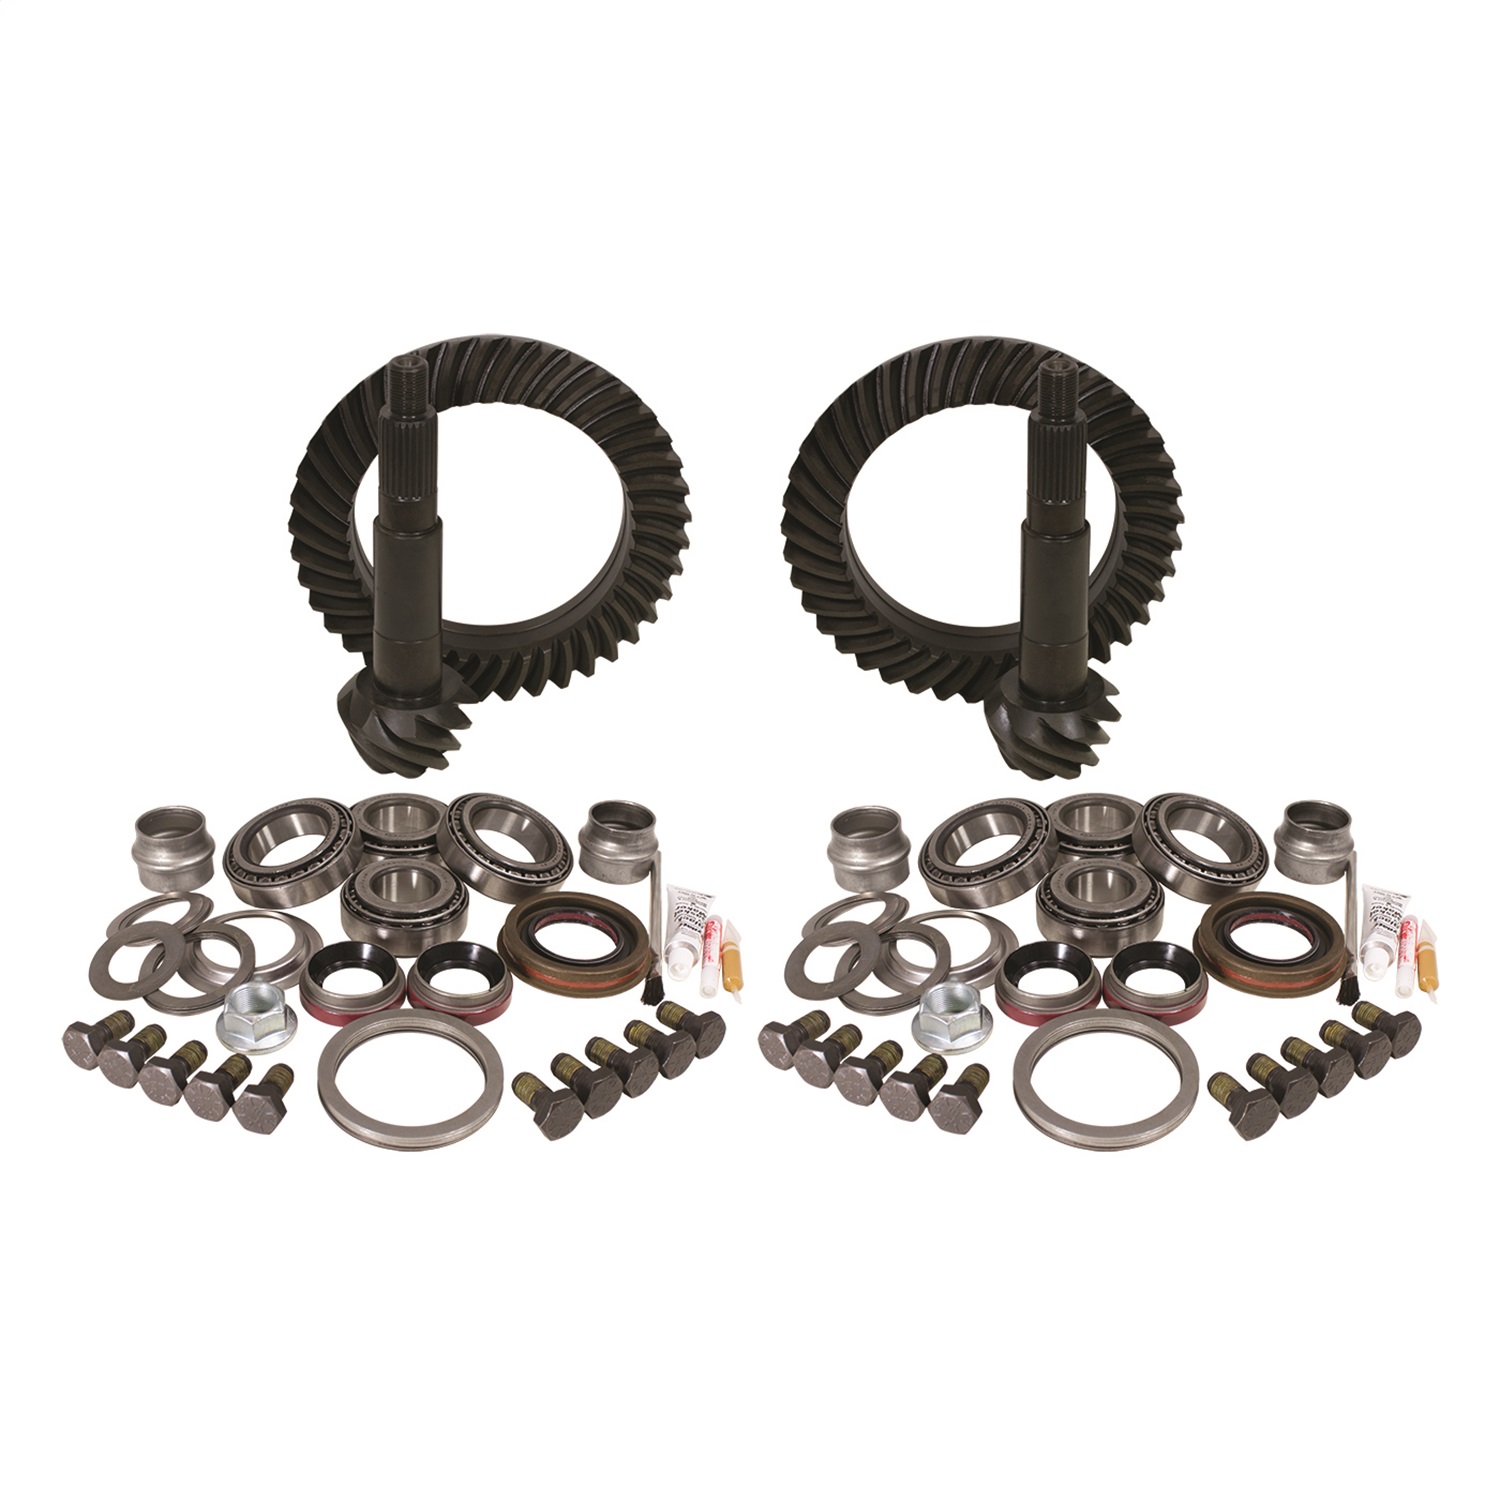 USA Standard Gear ZGK054 Ring And Pinion Set And Complete Install Kit